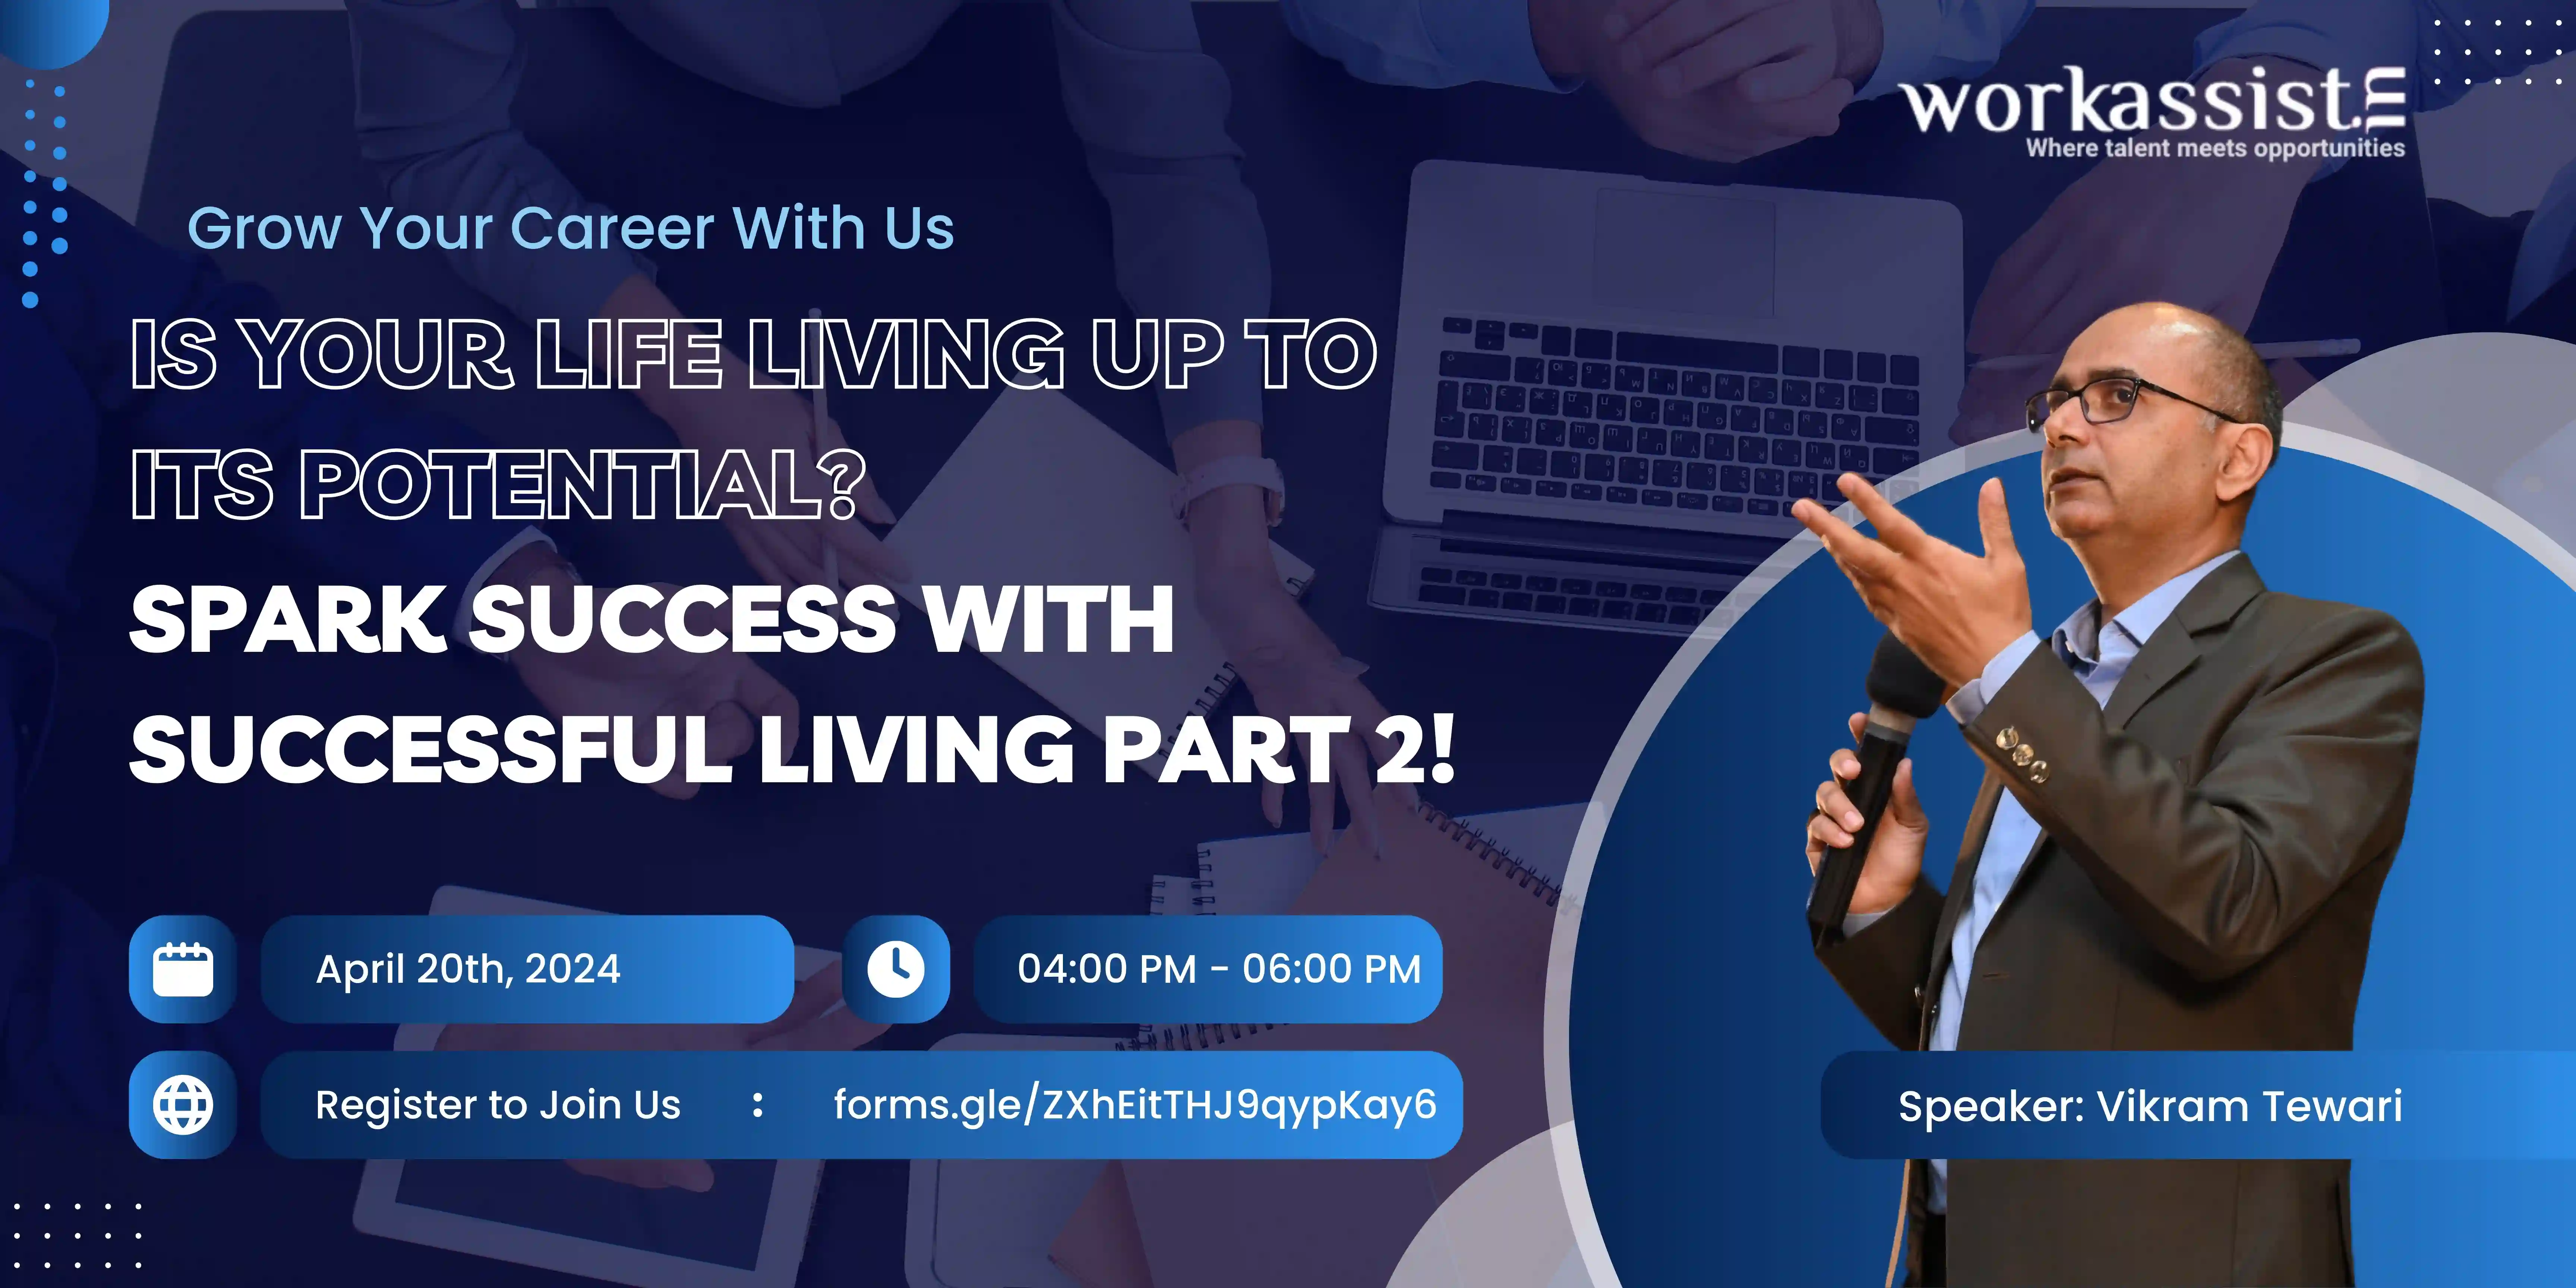 Is Your Life Living Up to Its Potential? Spark Success with Successful Living Part 2!